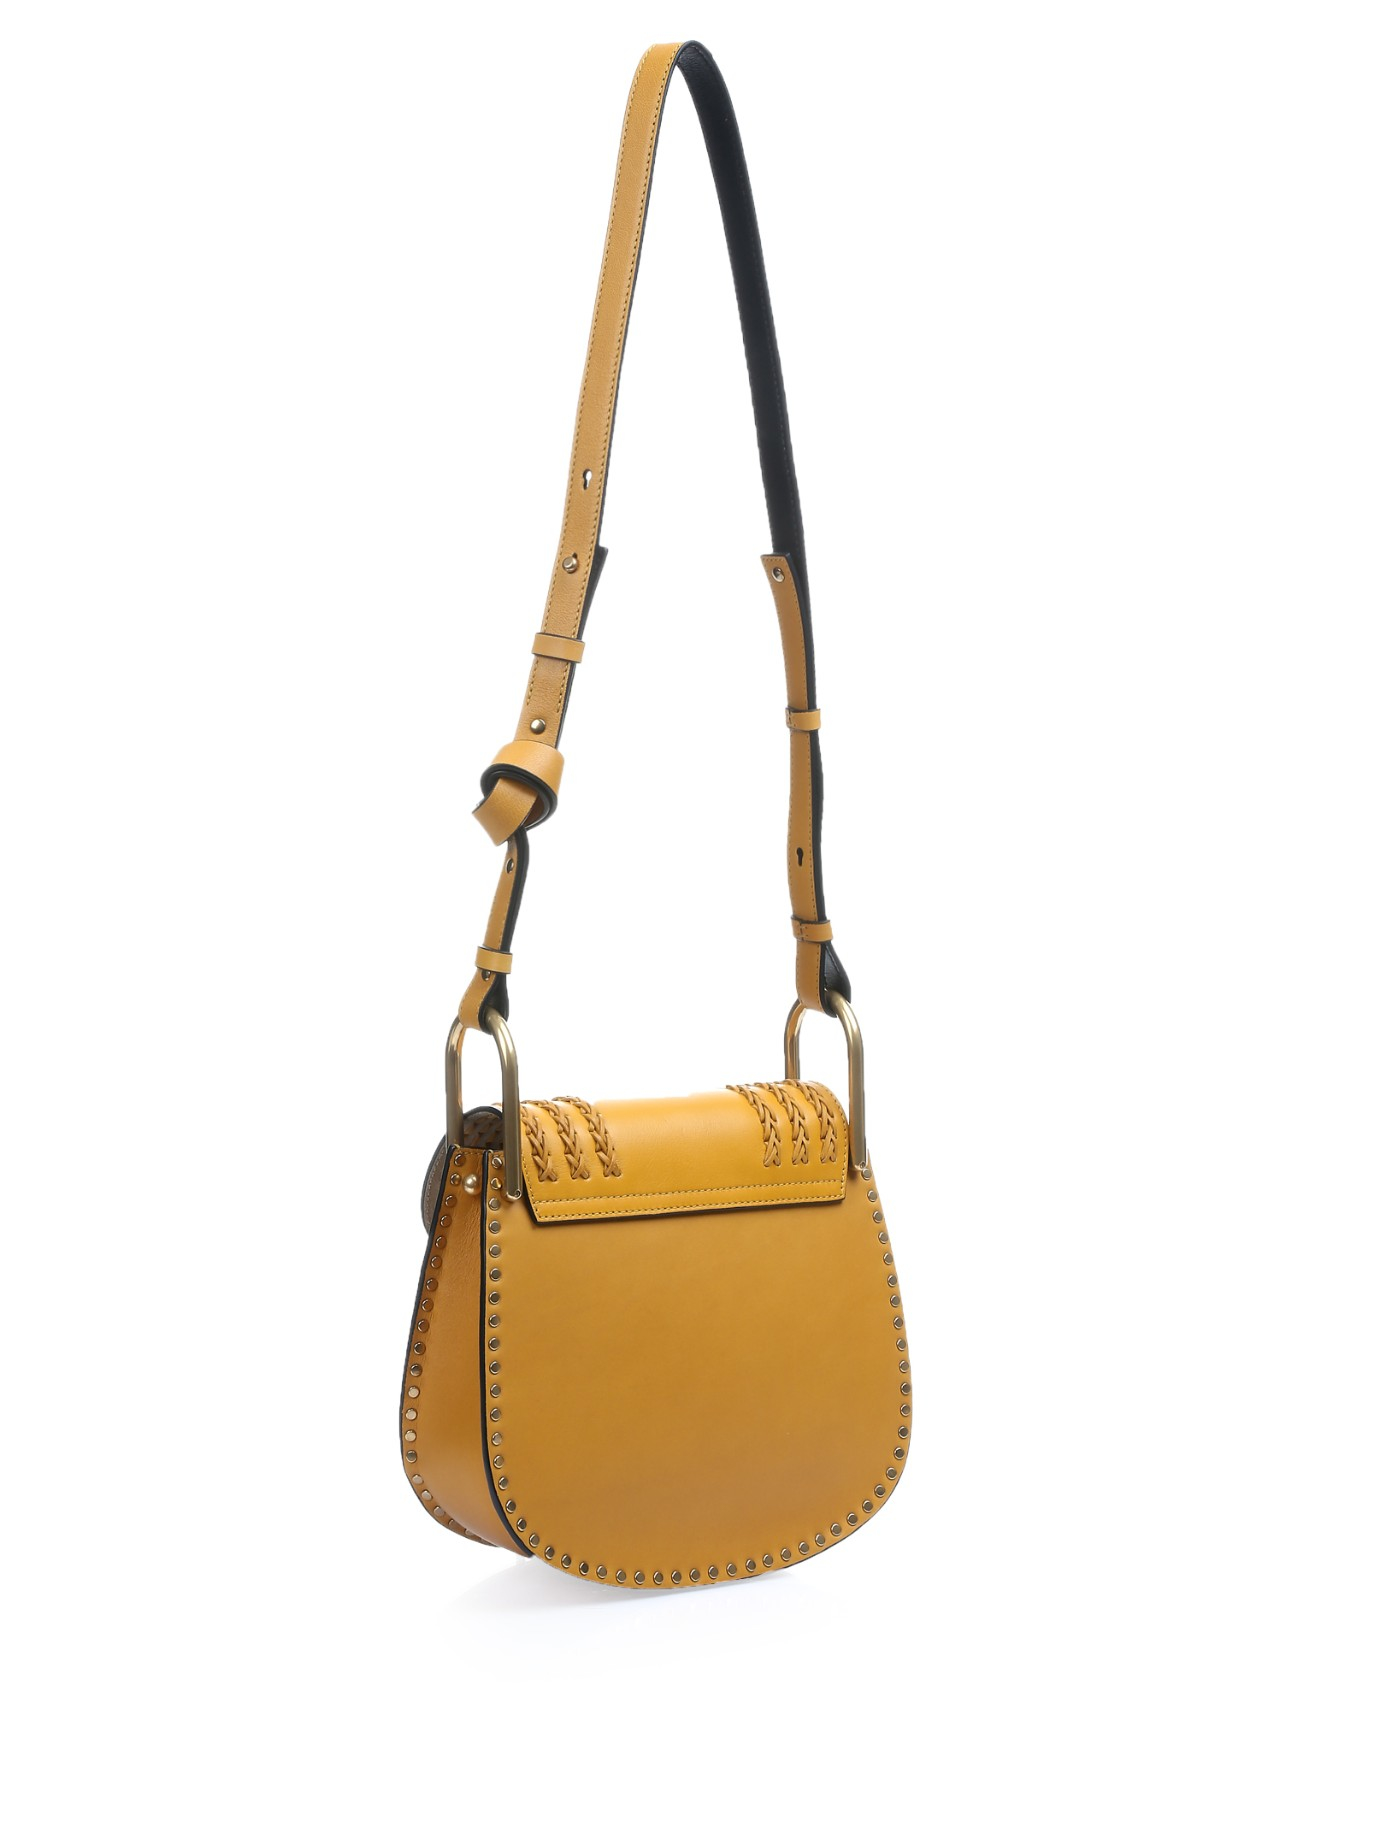 Lyst - Chloé Hudson Small Leather Cross-Body Bag in Yellow